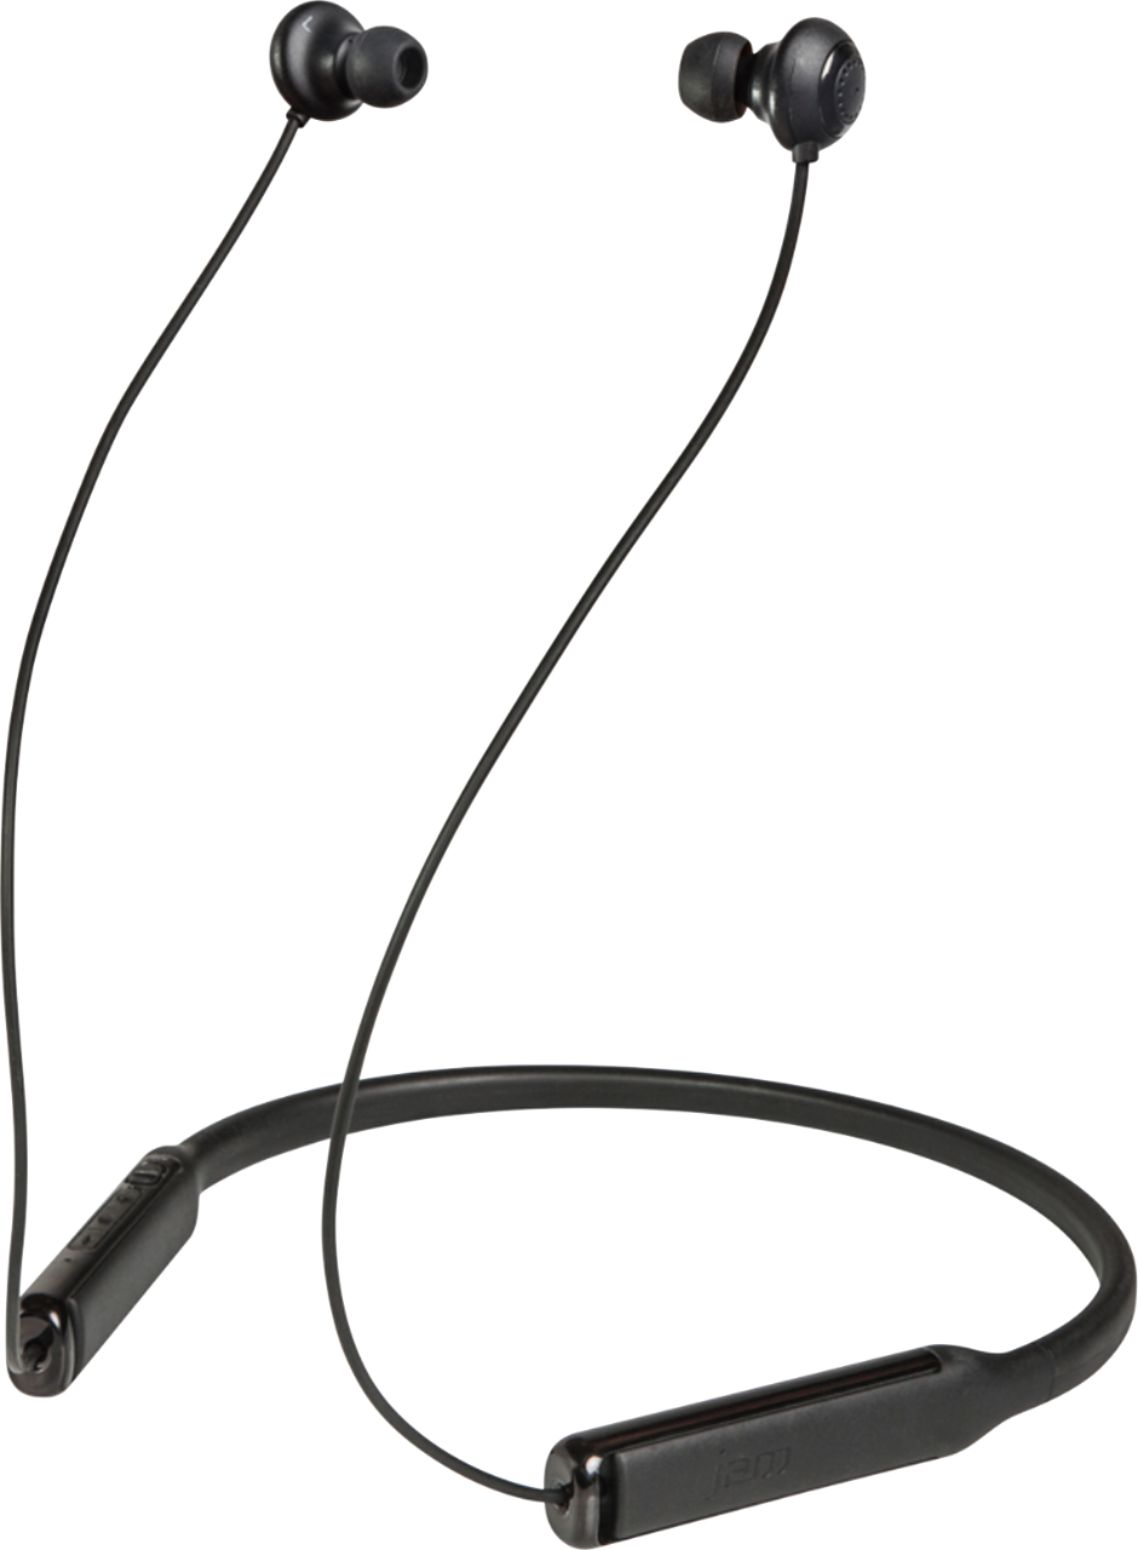 JAM CONTOUR Wireless In-Ear Behind-the-Neck Noise Cancelling Headphones  Black HX-EP750BK - Best Buy